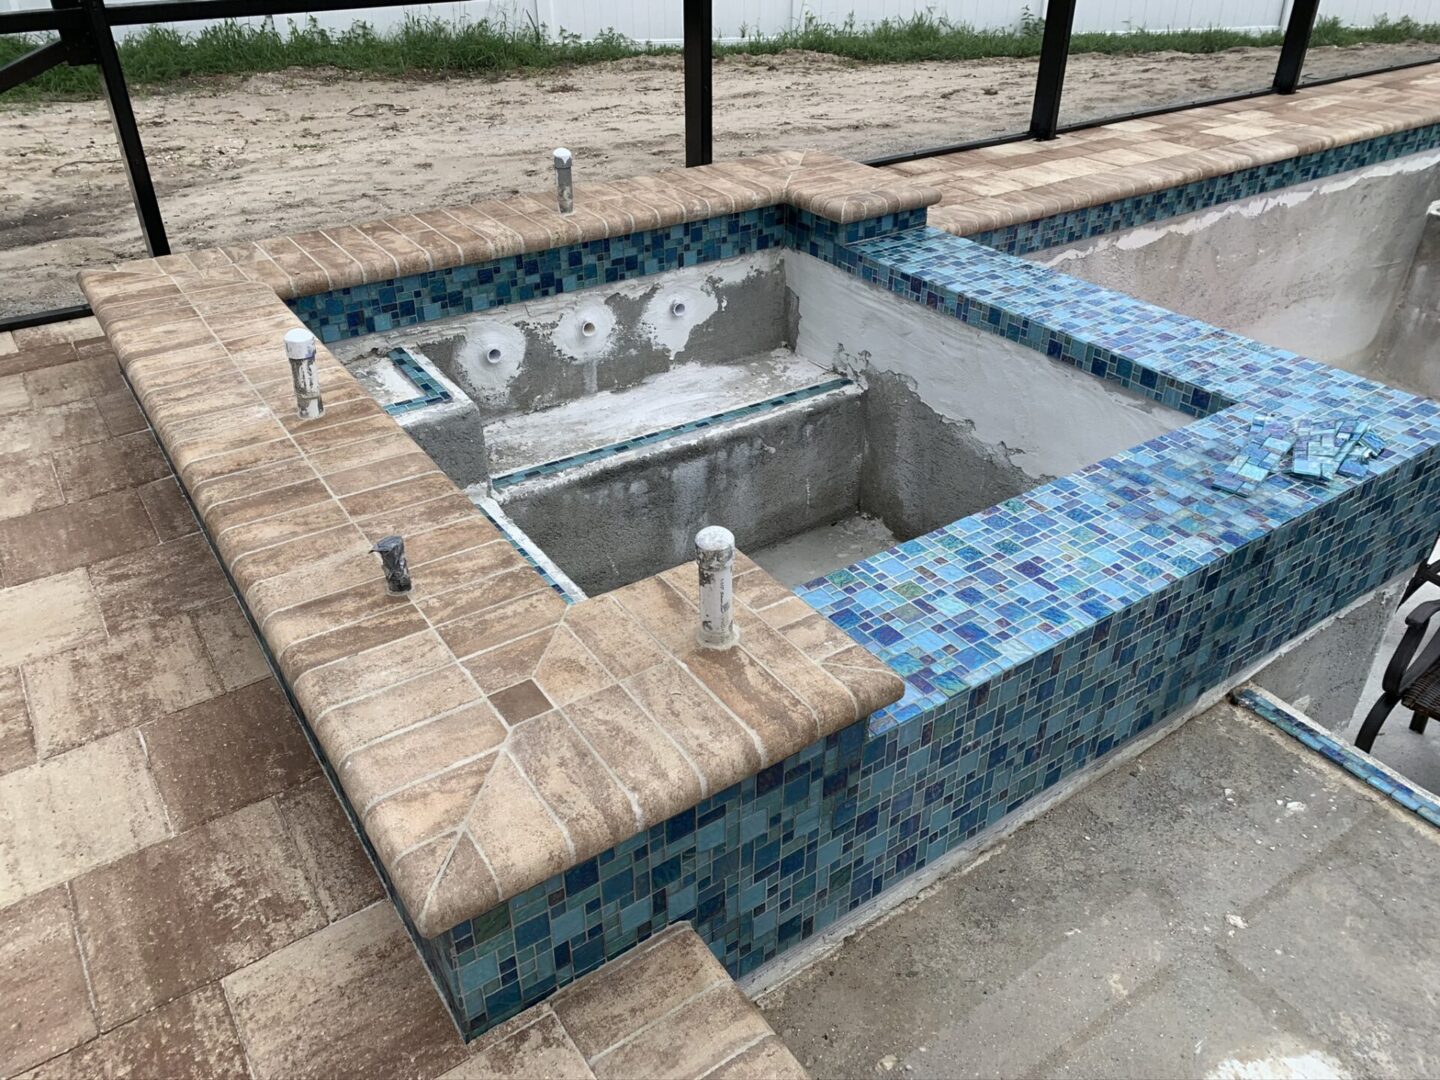 An empty, partially tiled pool under construction, with visible plumbing pipes and unfinished plastering. The pool has blue mosaic tiles and is surrounded by a brick-paved deck.